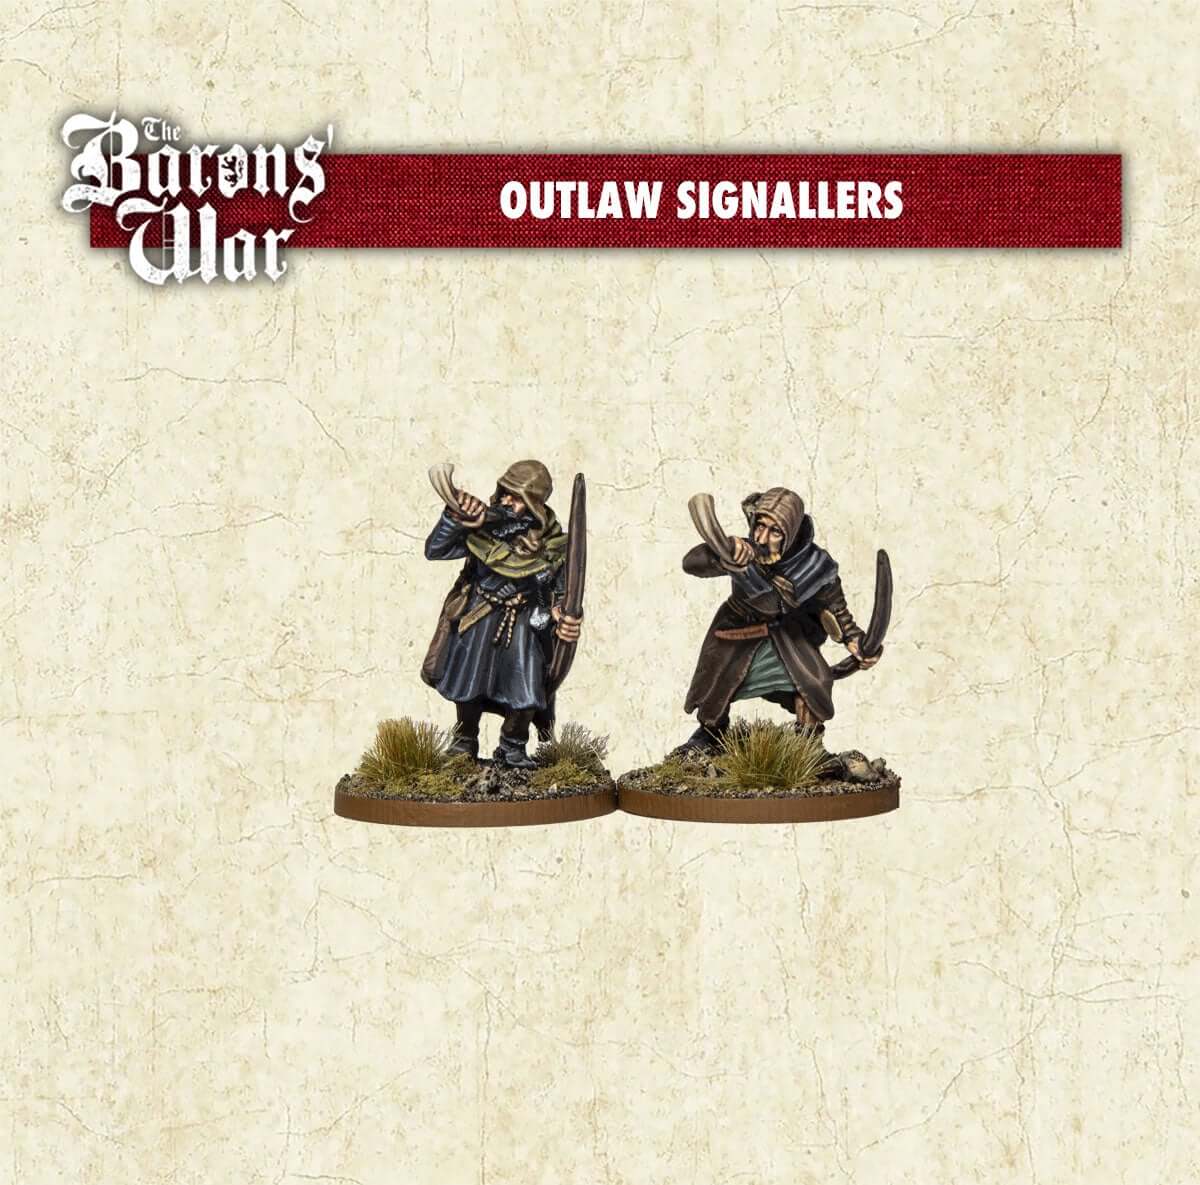 Baron's War Outlaw Signallers 28mm historical miniatures